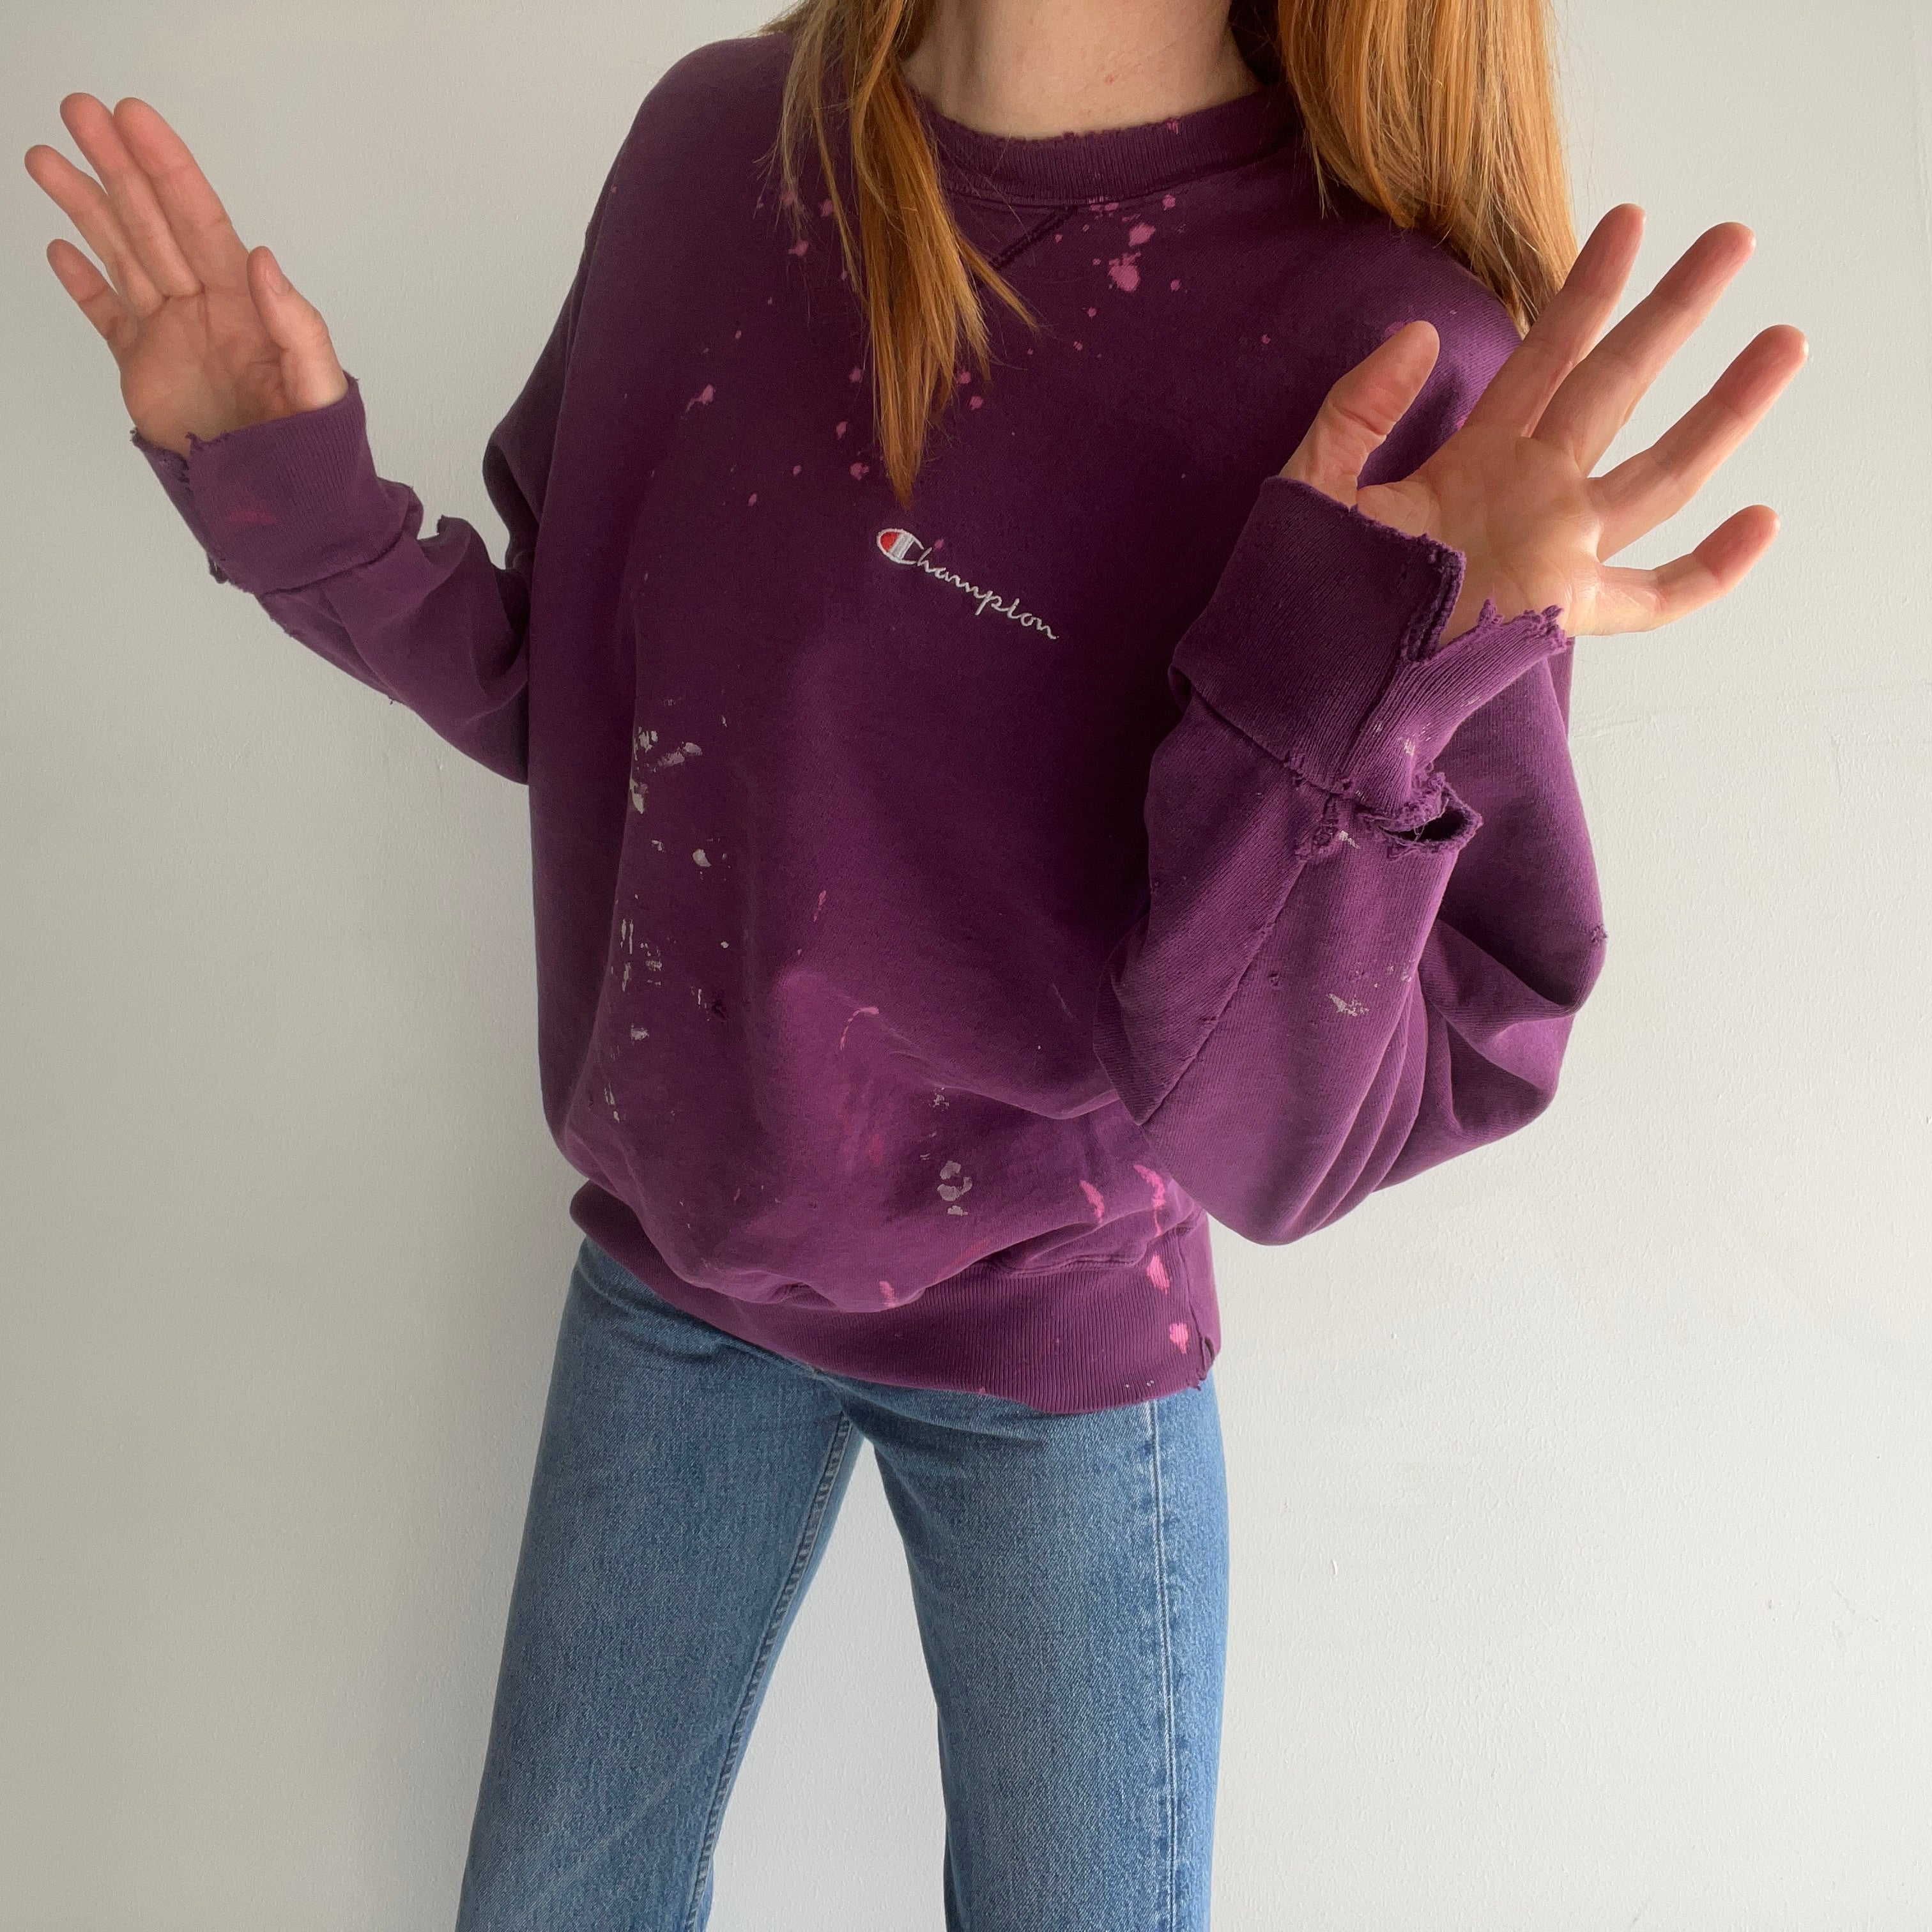 1990s Paint Stained and Thrashed Champion Brand Sweatshirt